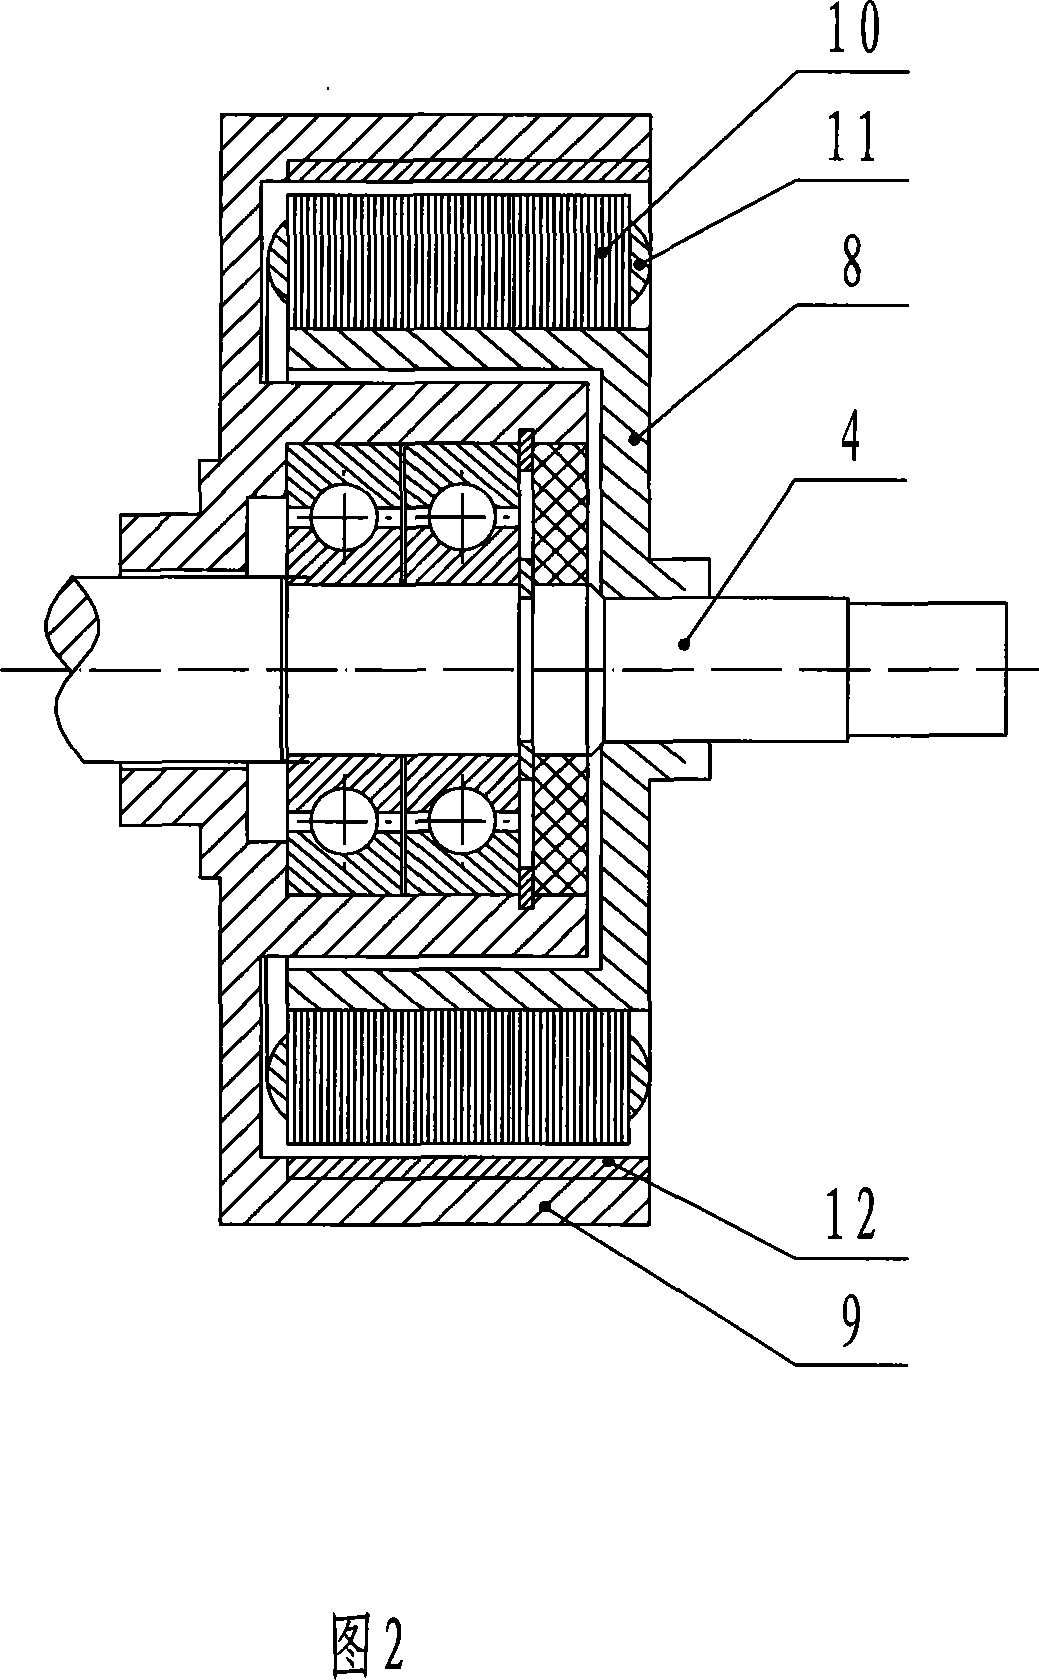 Electric vehicle driving device with speed variator and flexible combination